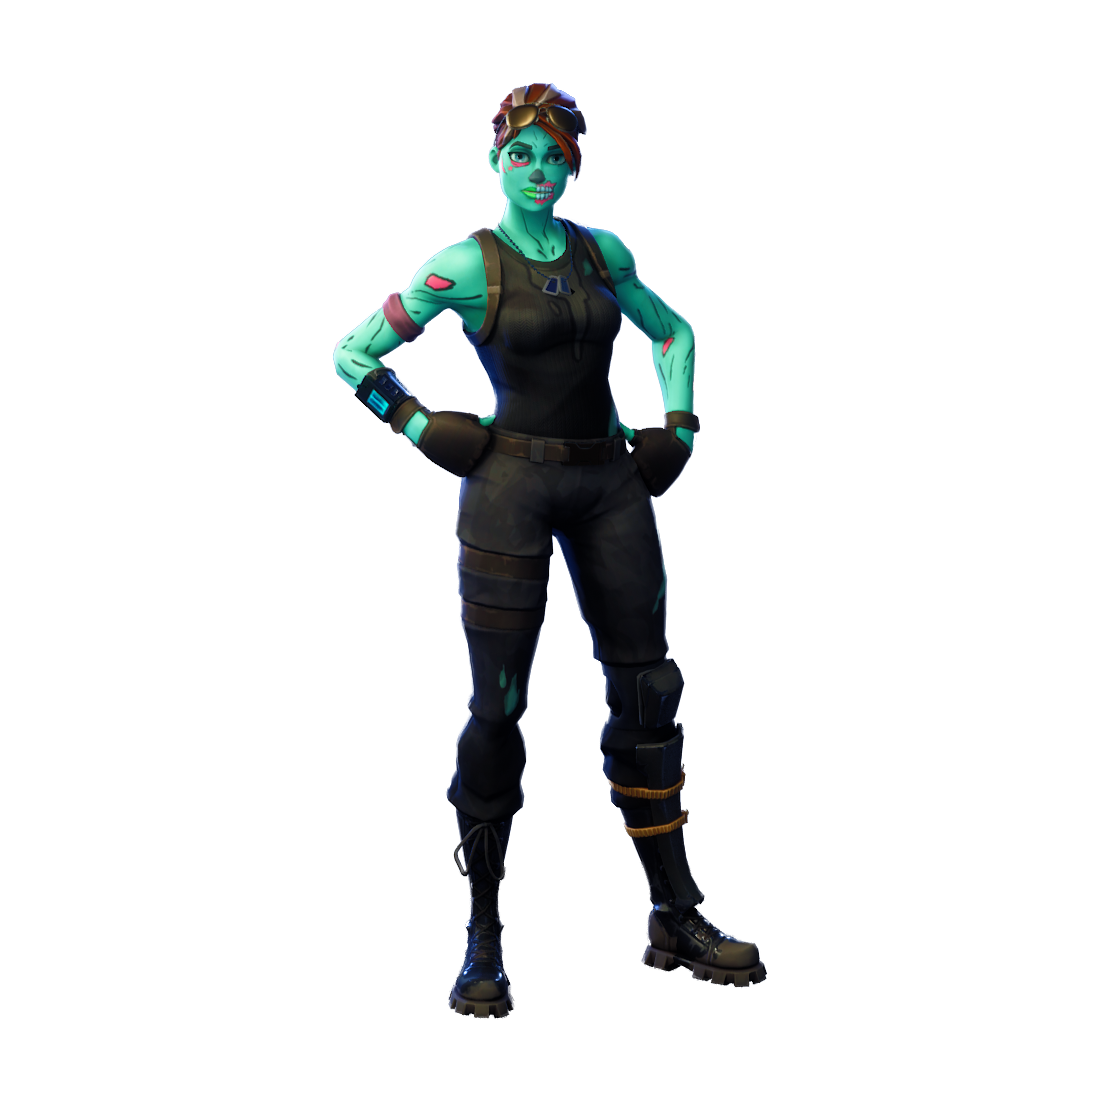 Download Fortnite Ghoul Trooper Png Image For Free